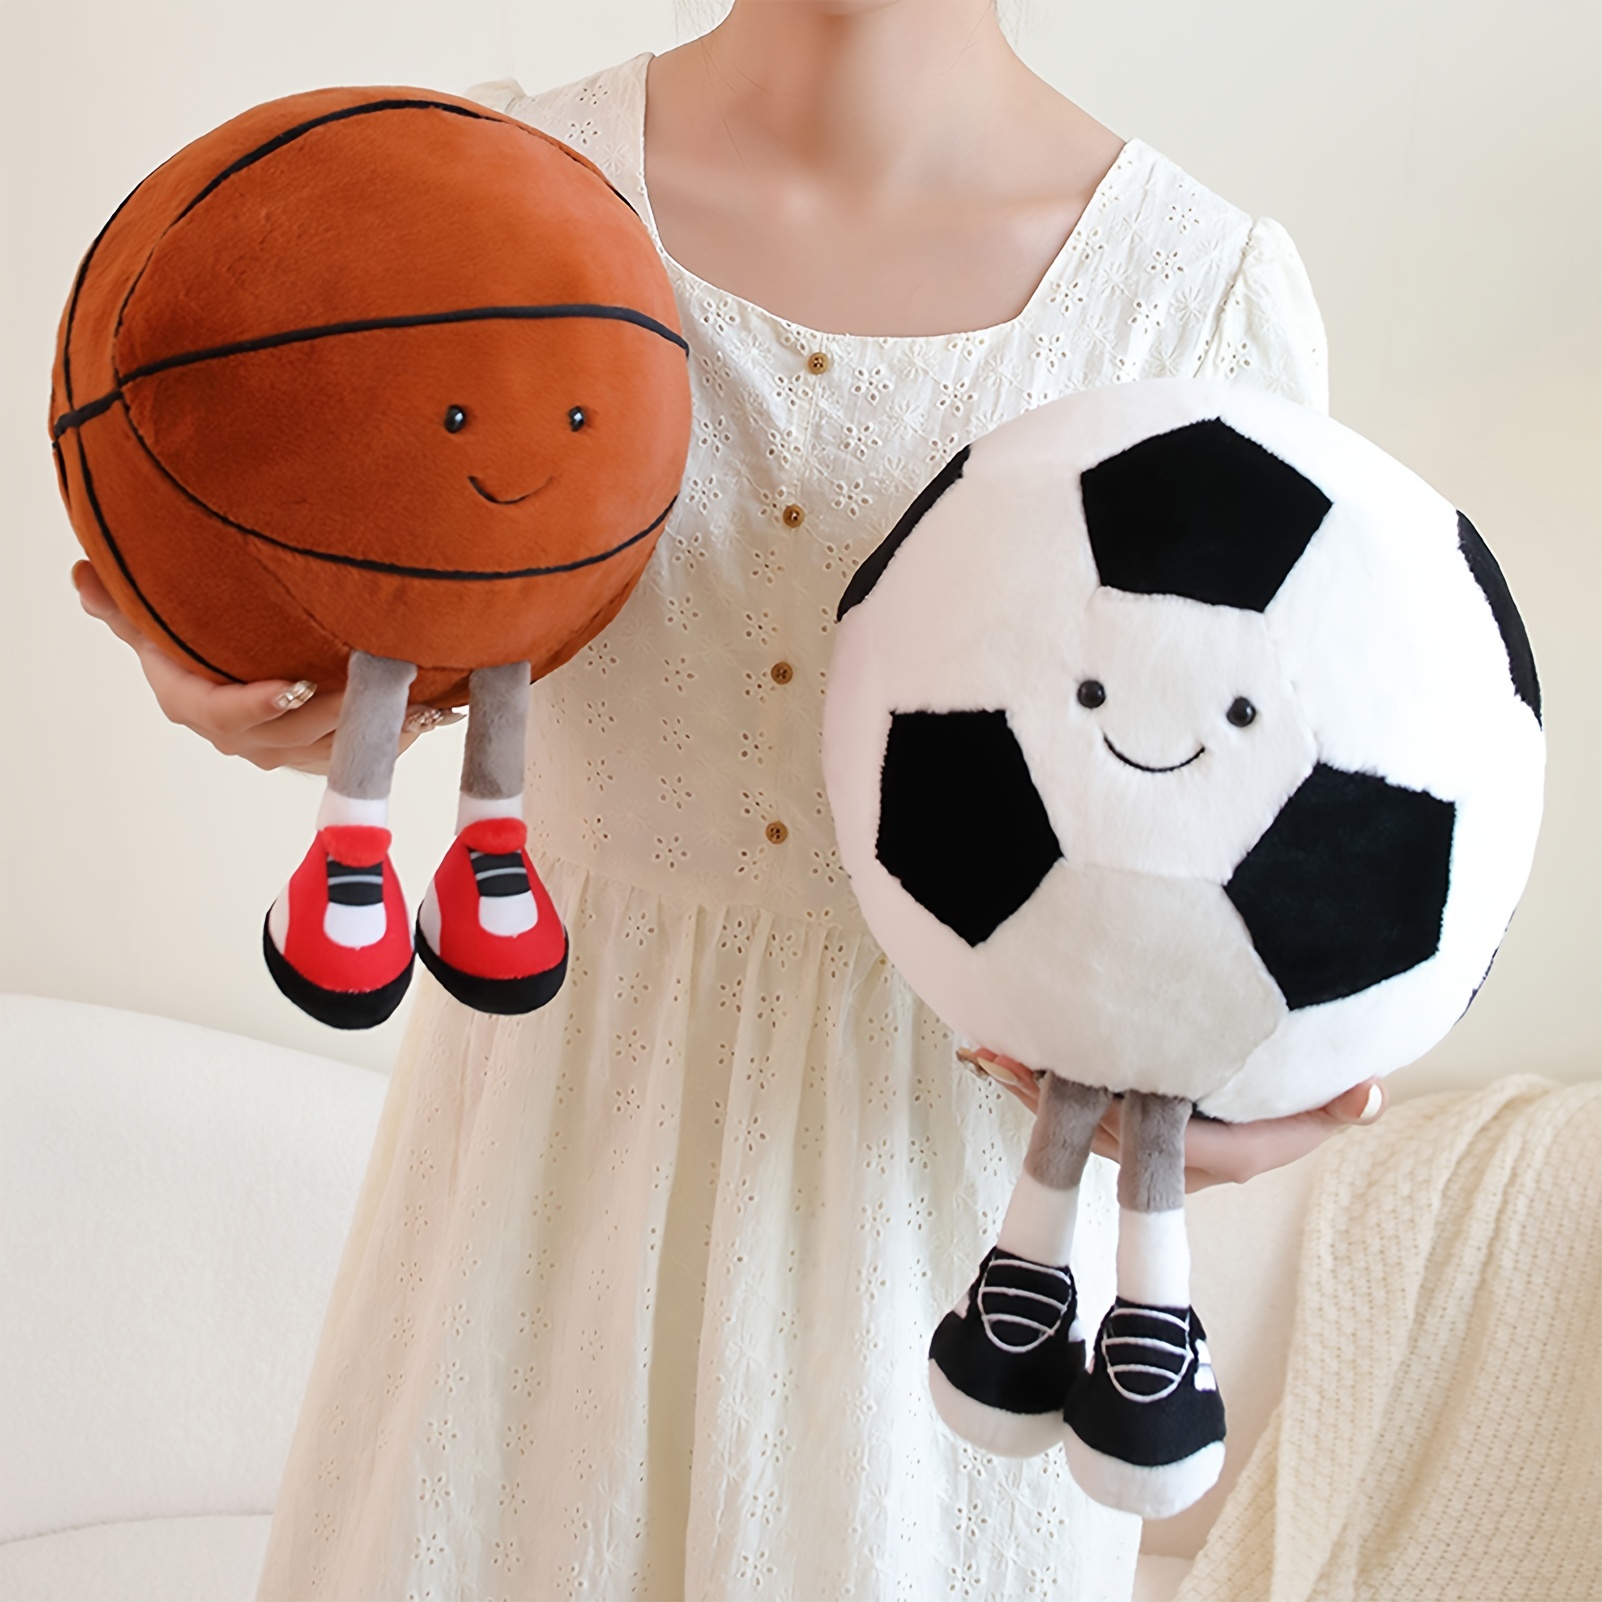 Jellycat Amuseable Sports Football Soft Toy